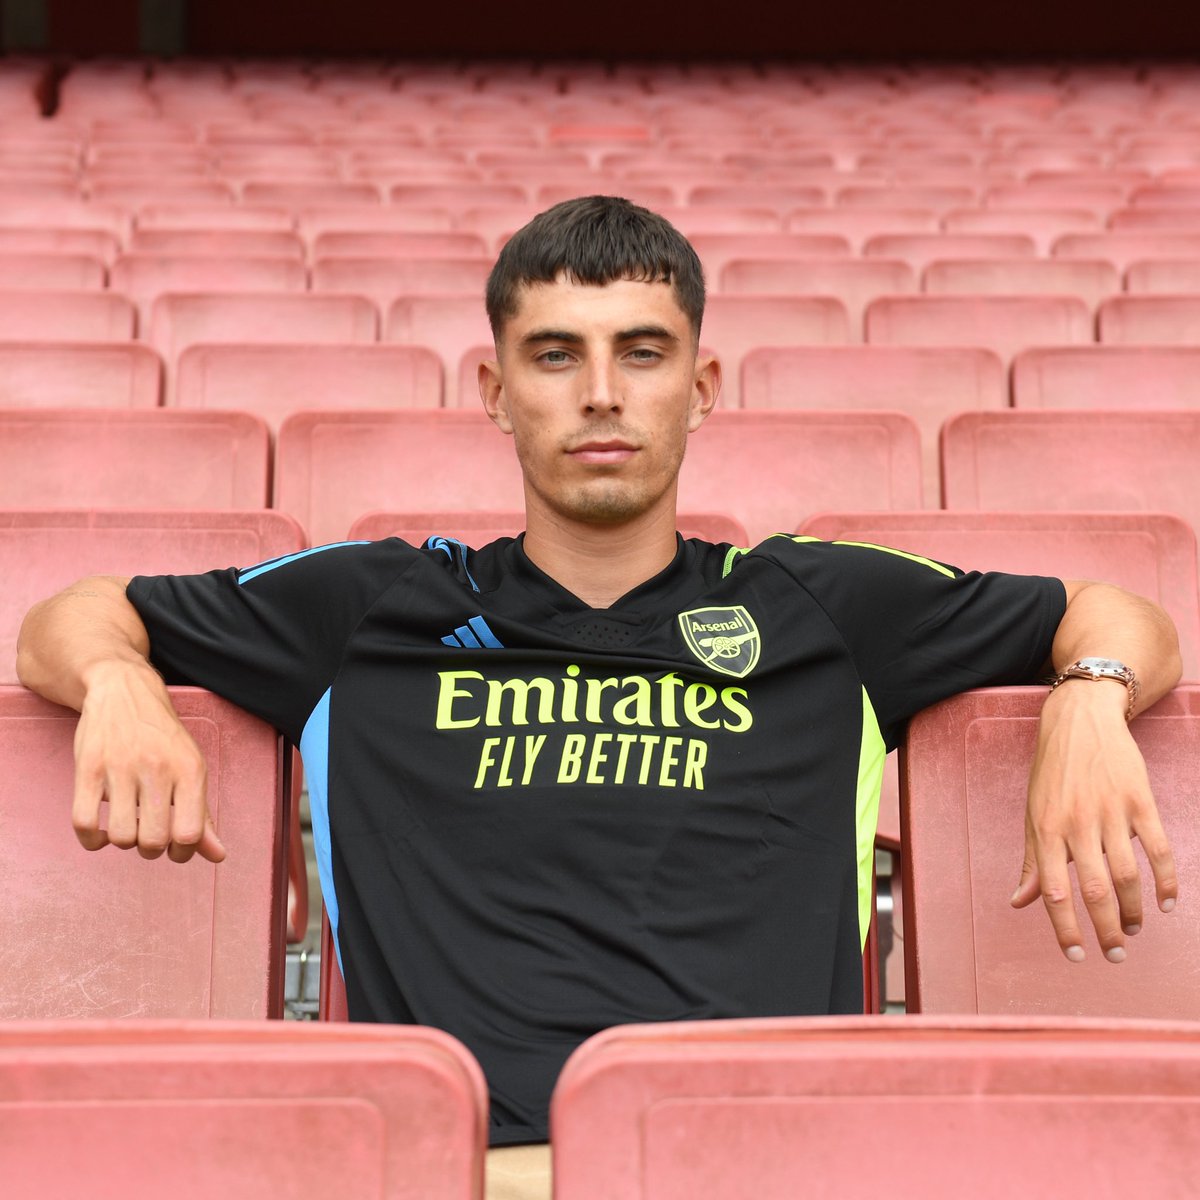 Three years after arriving in London, Kai Havertz finally found his true home.